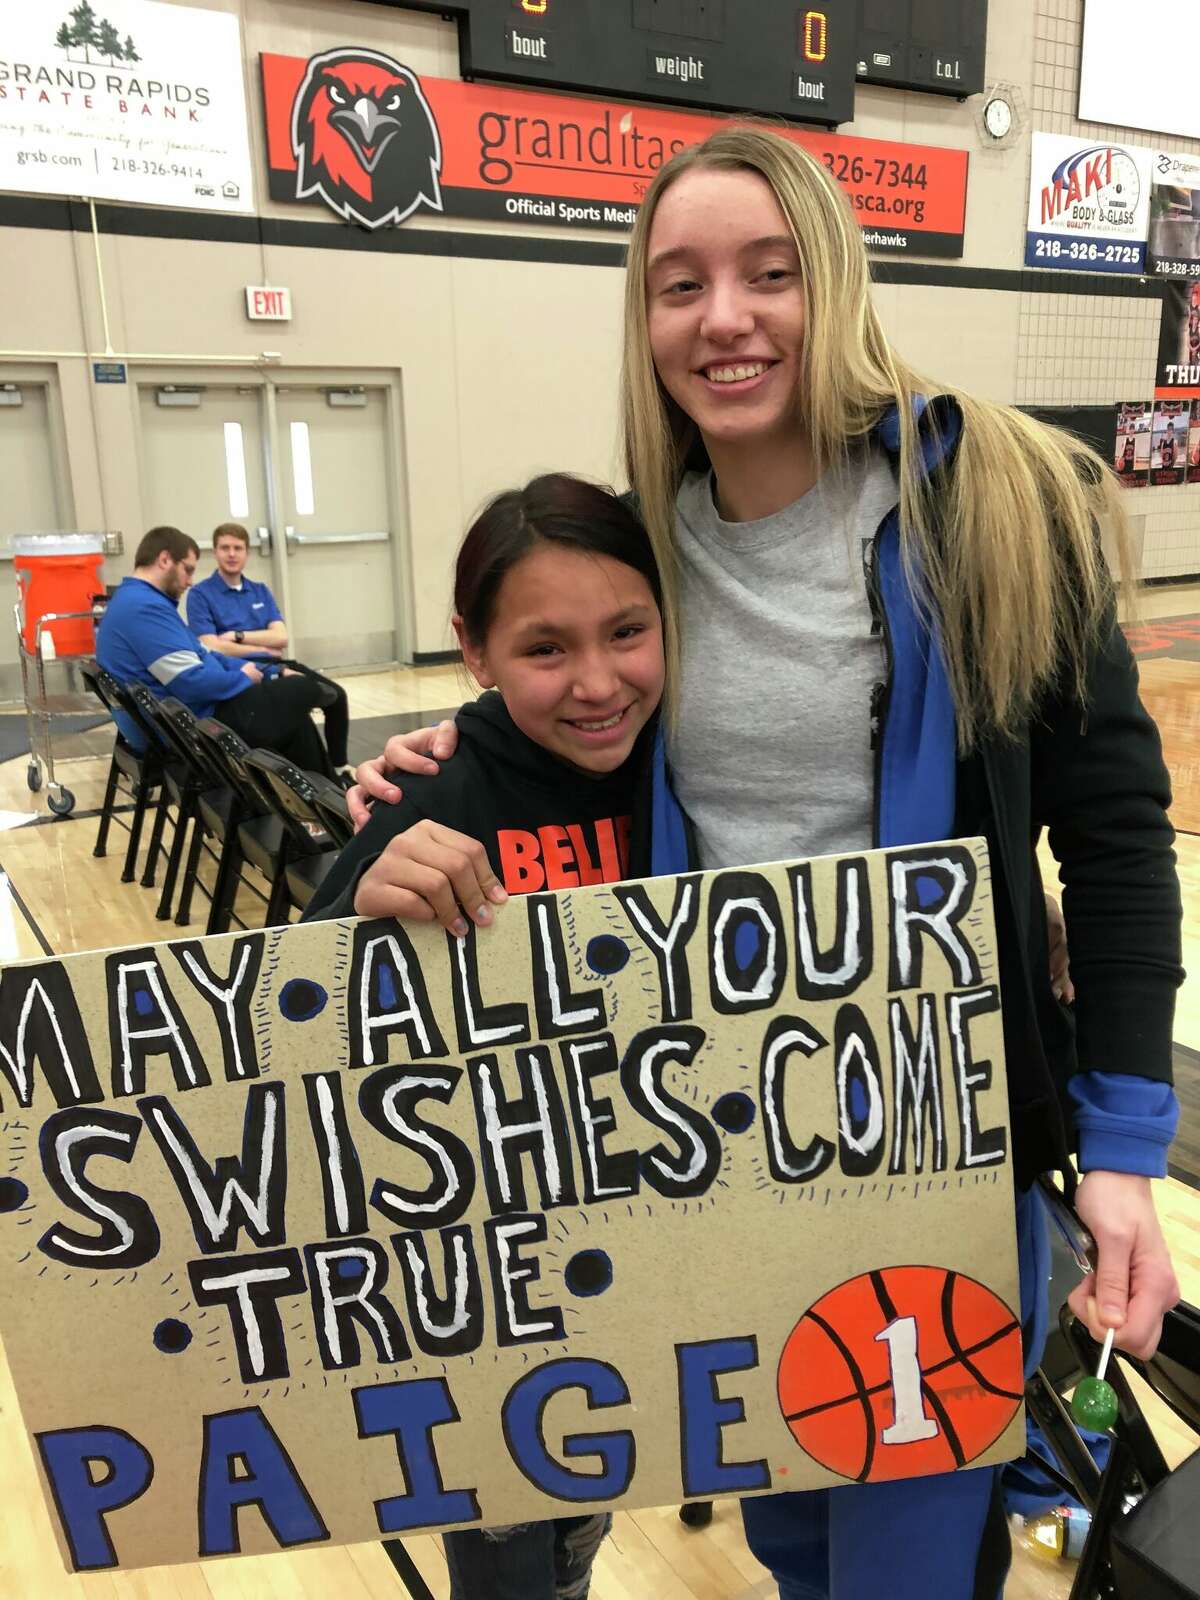 Paige Bueckers after a Hopkins game with a fan who traveled from a nearby city to watch her play. Brian Cosgriff, Bueckers' high school coach, said sometimes hundreds of kids would line up after games just to see Bueckes.